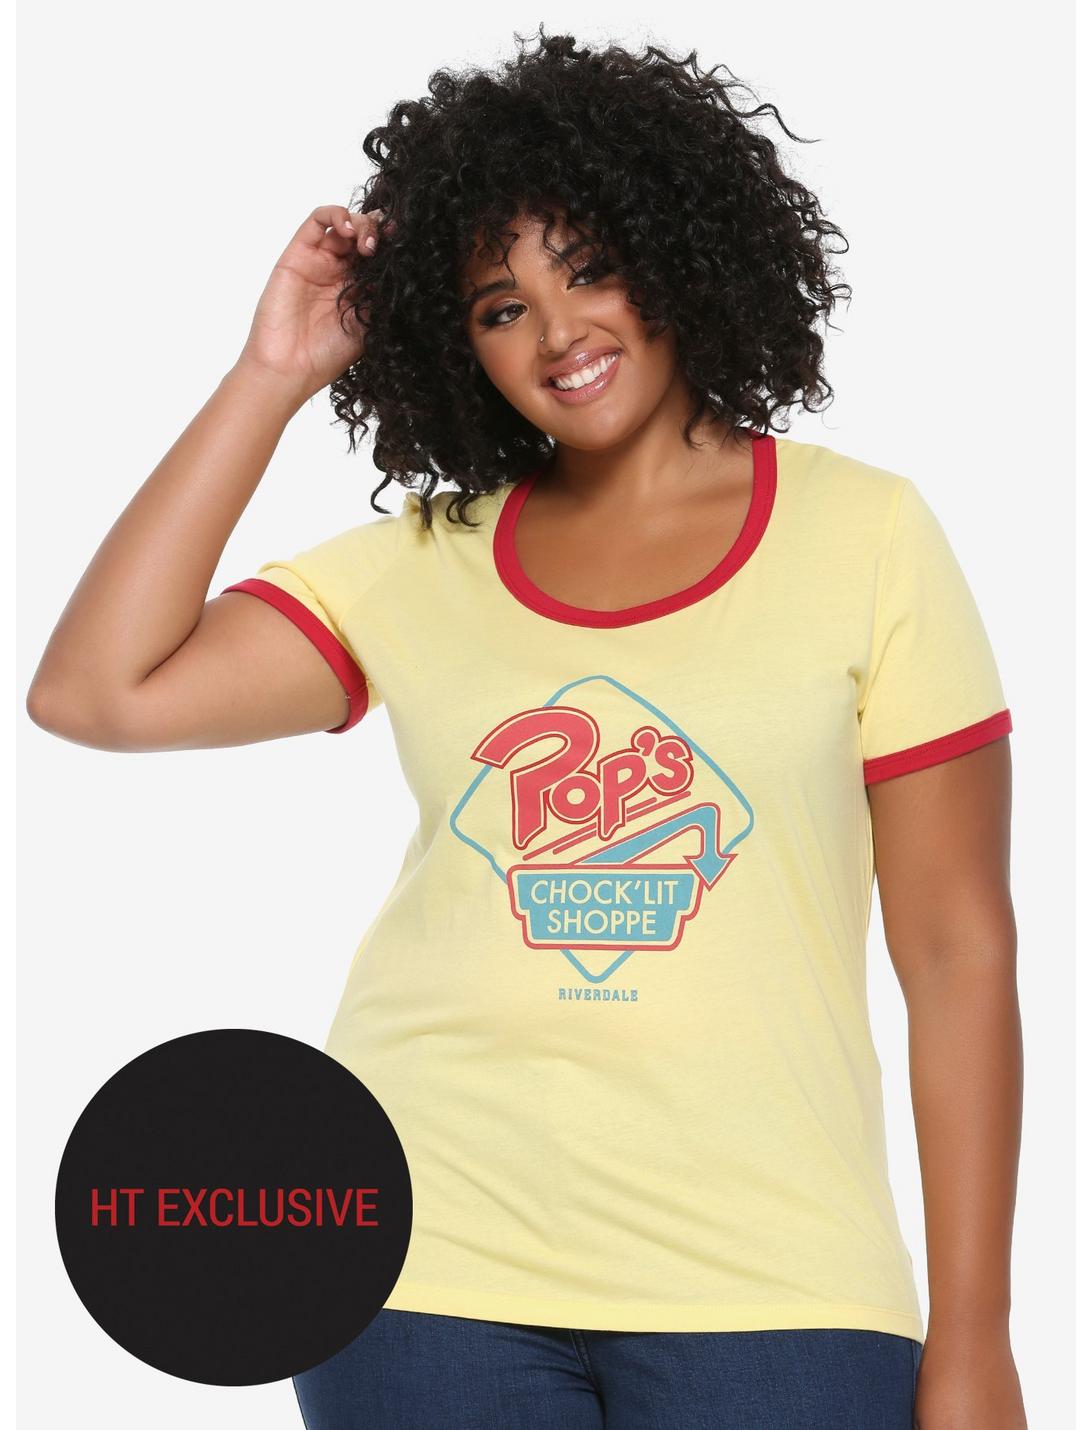 Riverdale Pop's Chock'lit Shoppe Girls Cosplay Ringer T-Shirt Plus Size Hot Topic Exclusive, YELLOW, hi-res